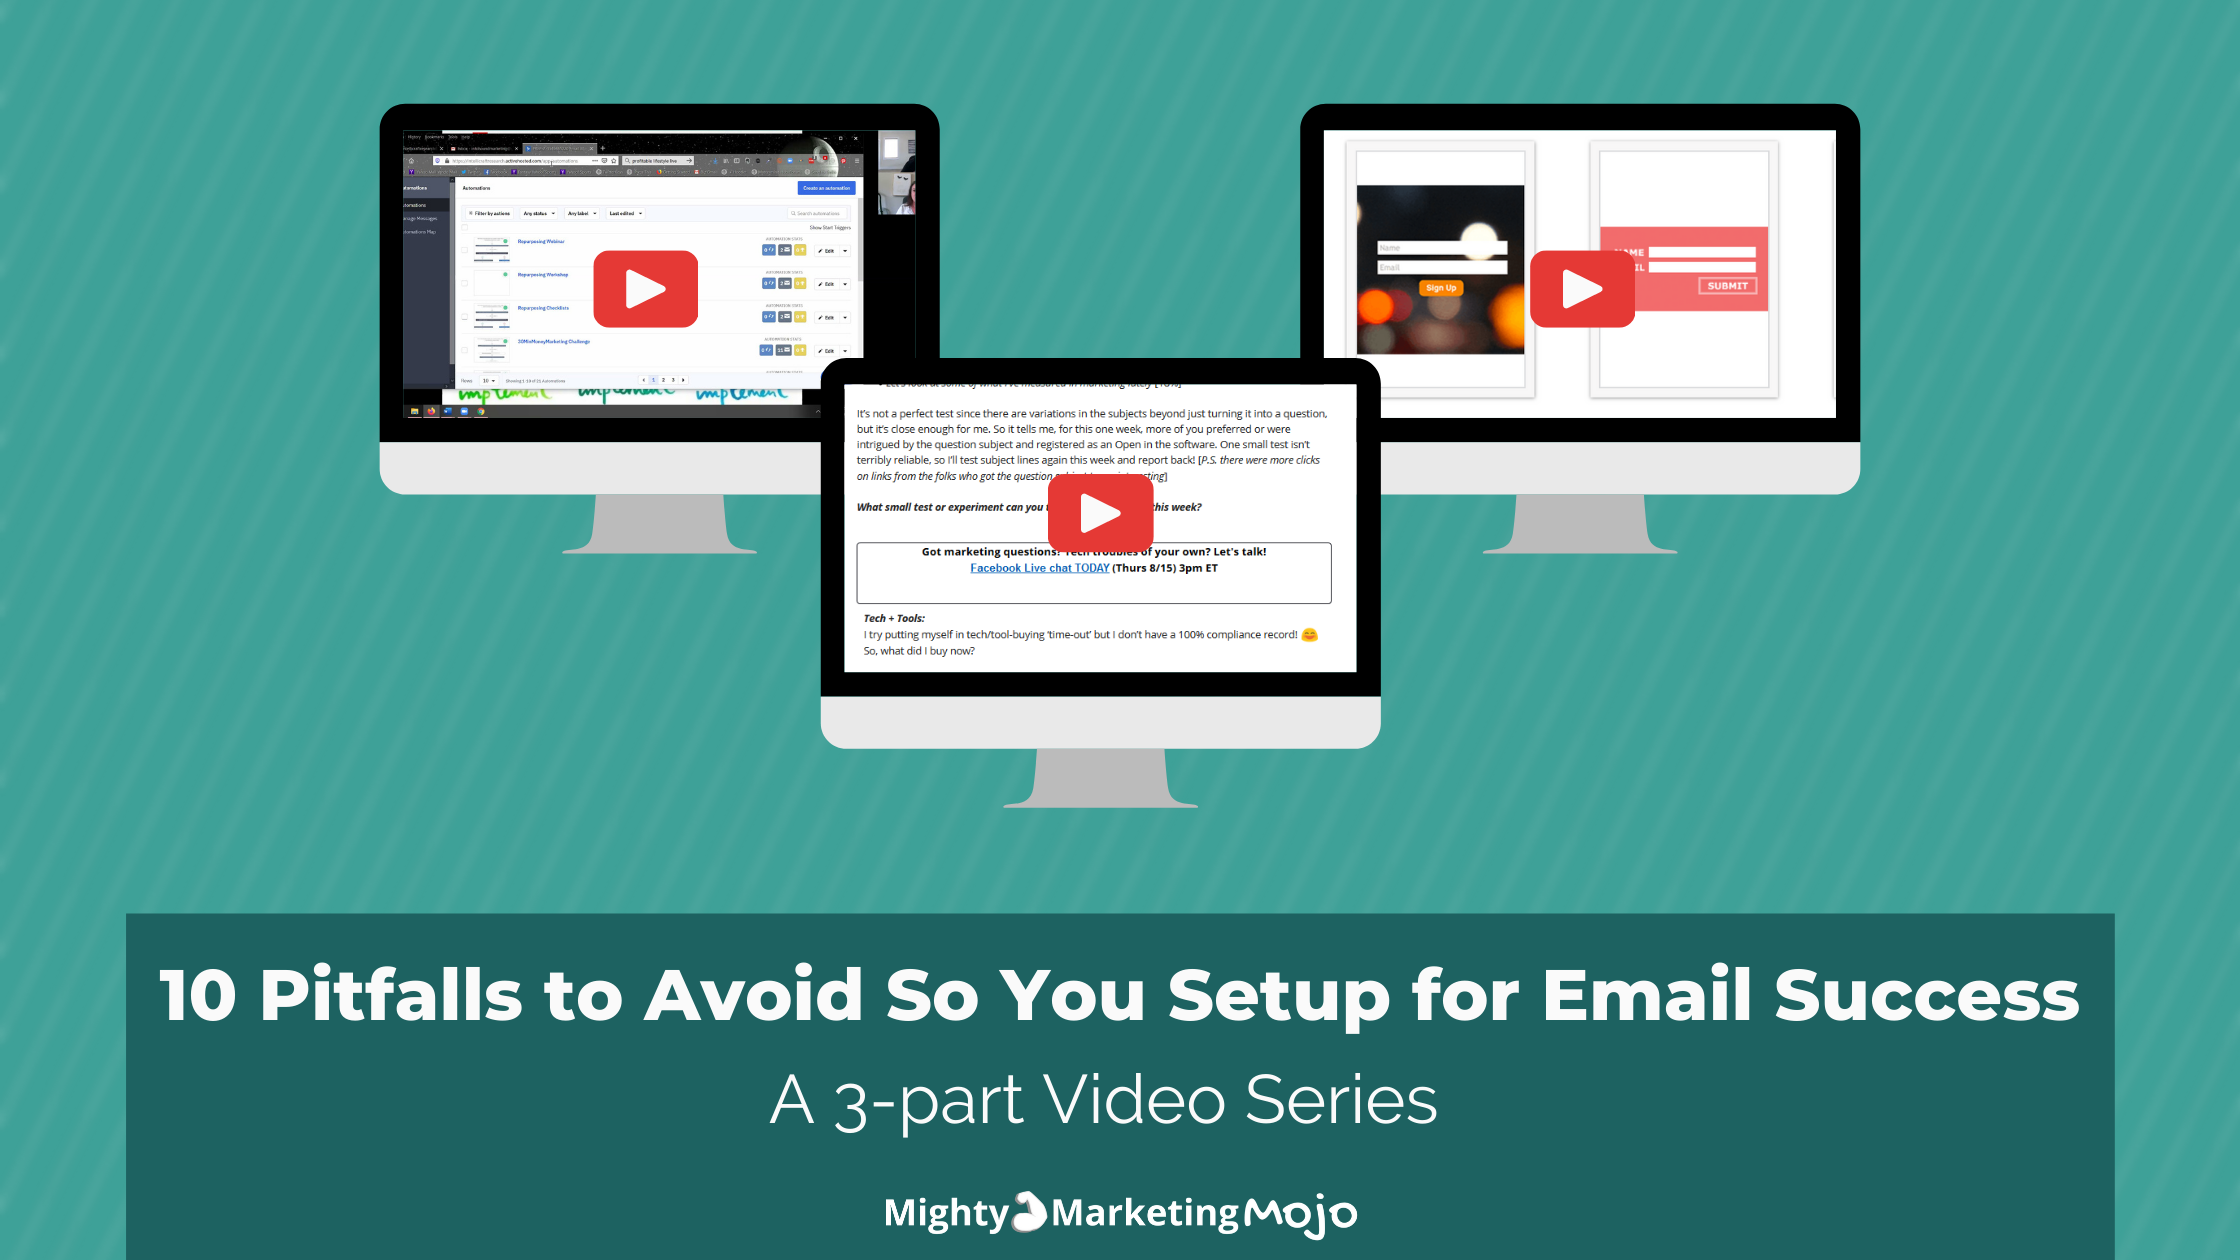 3 part video training series on email marketing 